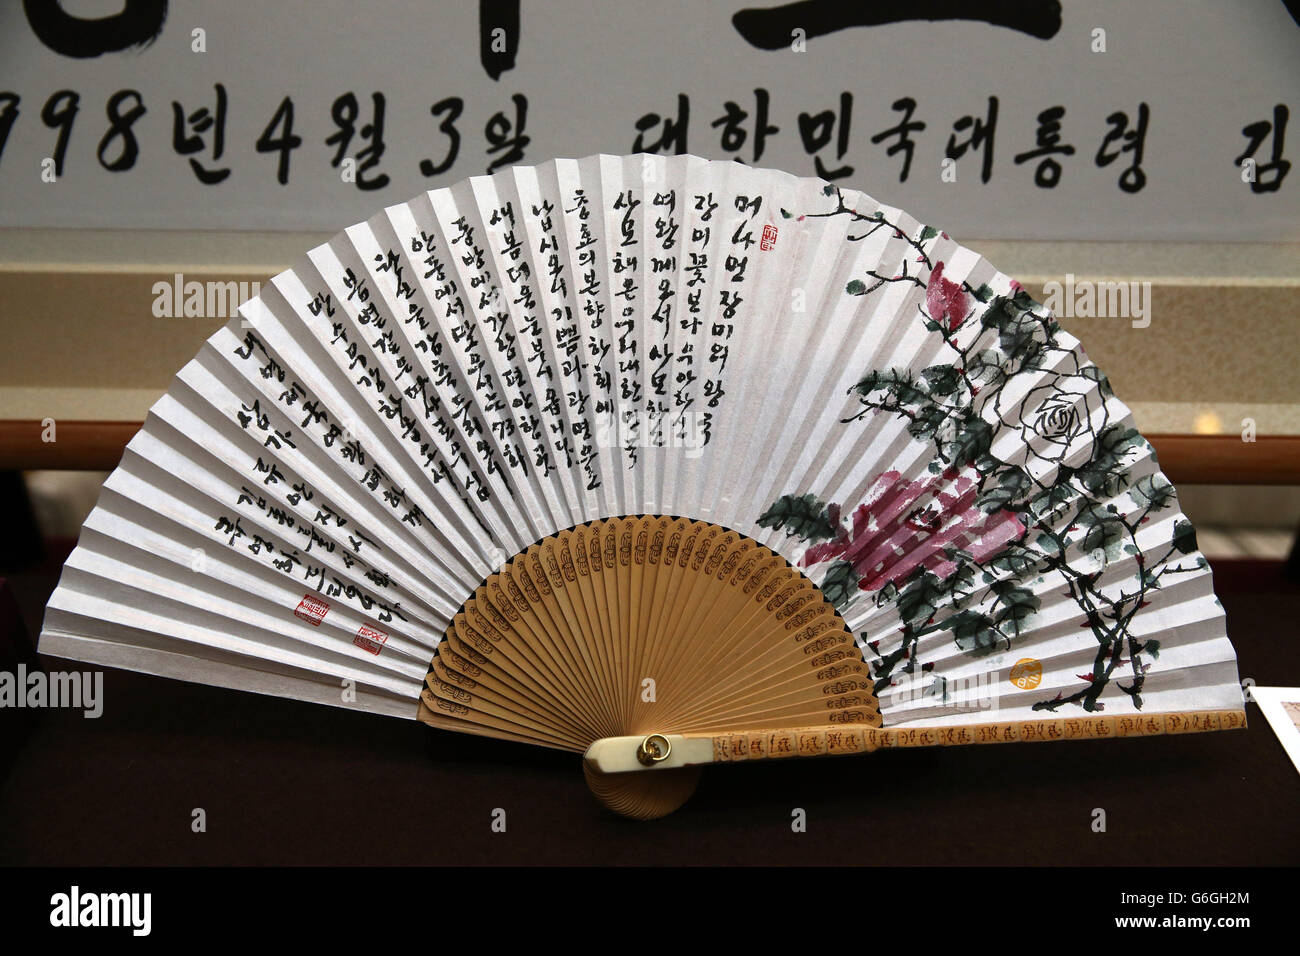 A fan gifted to Queen Elizabeth II by Mr. Ry Young-ha during her visit to Hahoe Village in Korea is on display before being shown to The President of the Republic of Korea at an exhibition of Korean related items from the Royal Collection and Royal Archives in the Picture Gallery of Buckingham Palace in London, England. The President of the Republic of Korea Park Geun-Hye is on a State Visit to the United Kingdom and during the trip she will attend a state banquet and visit Downing Street. Stock Photo